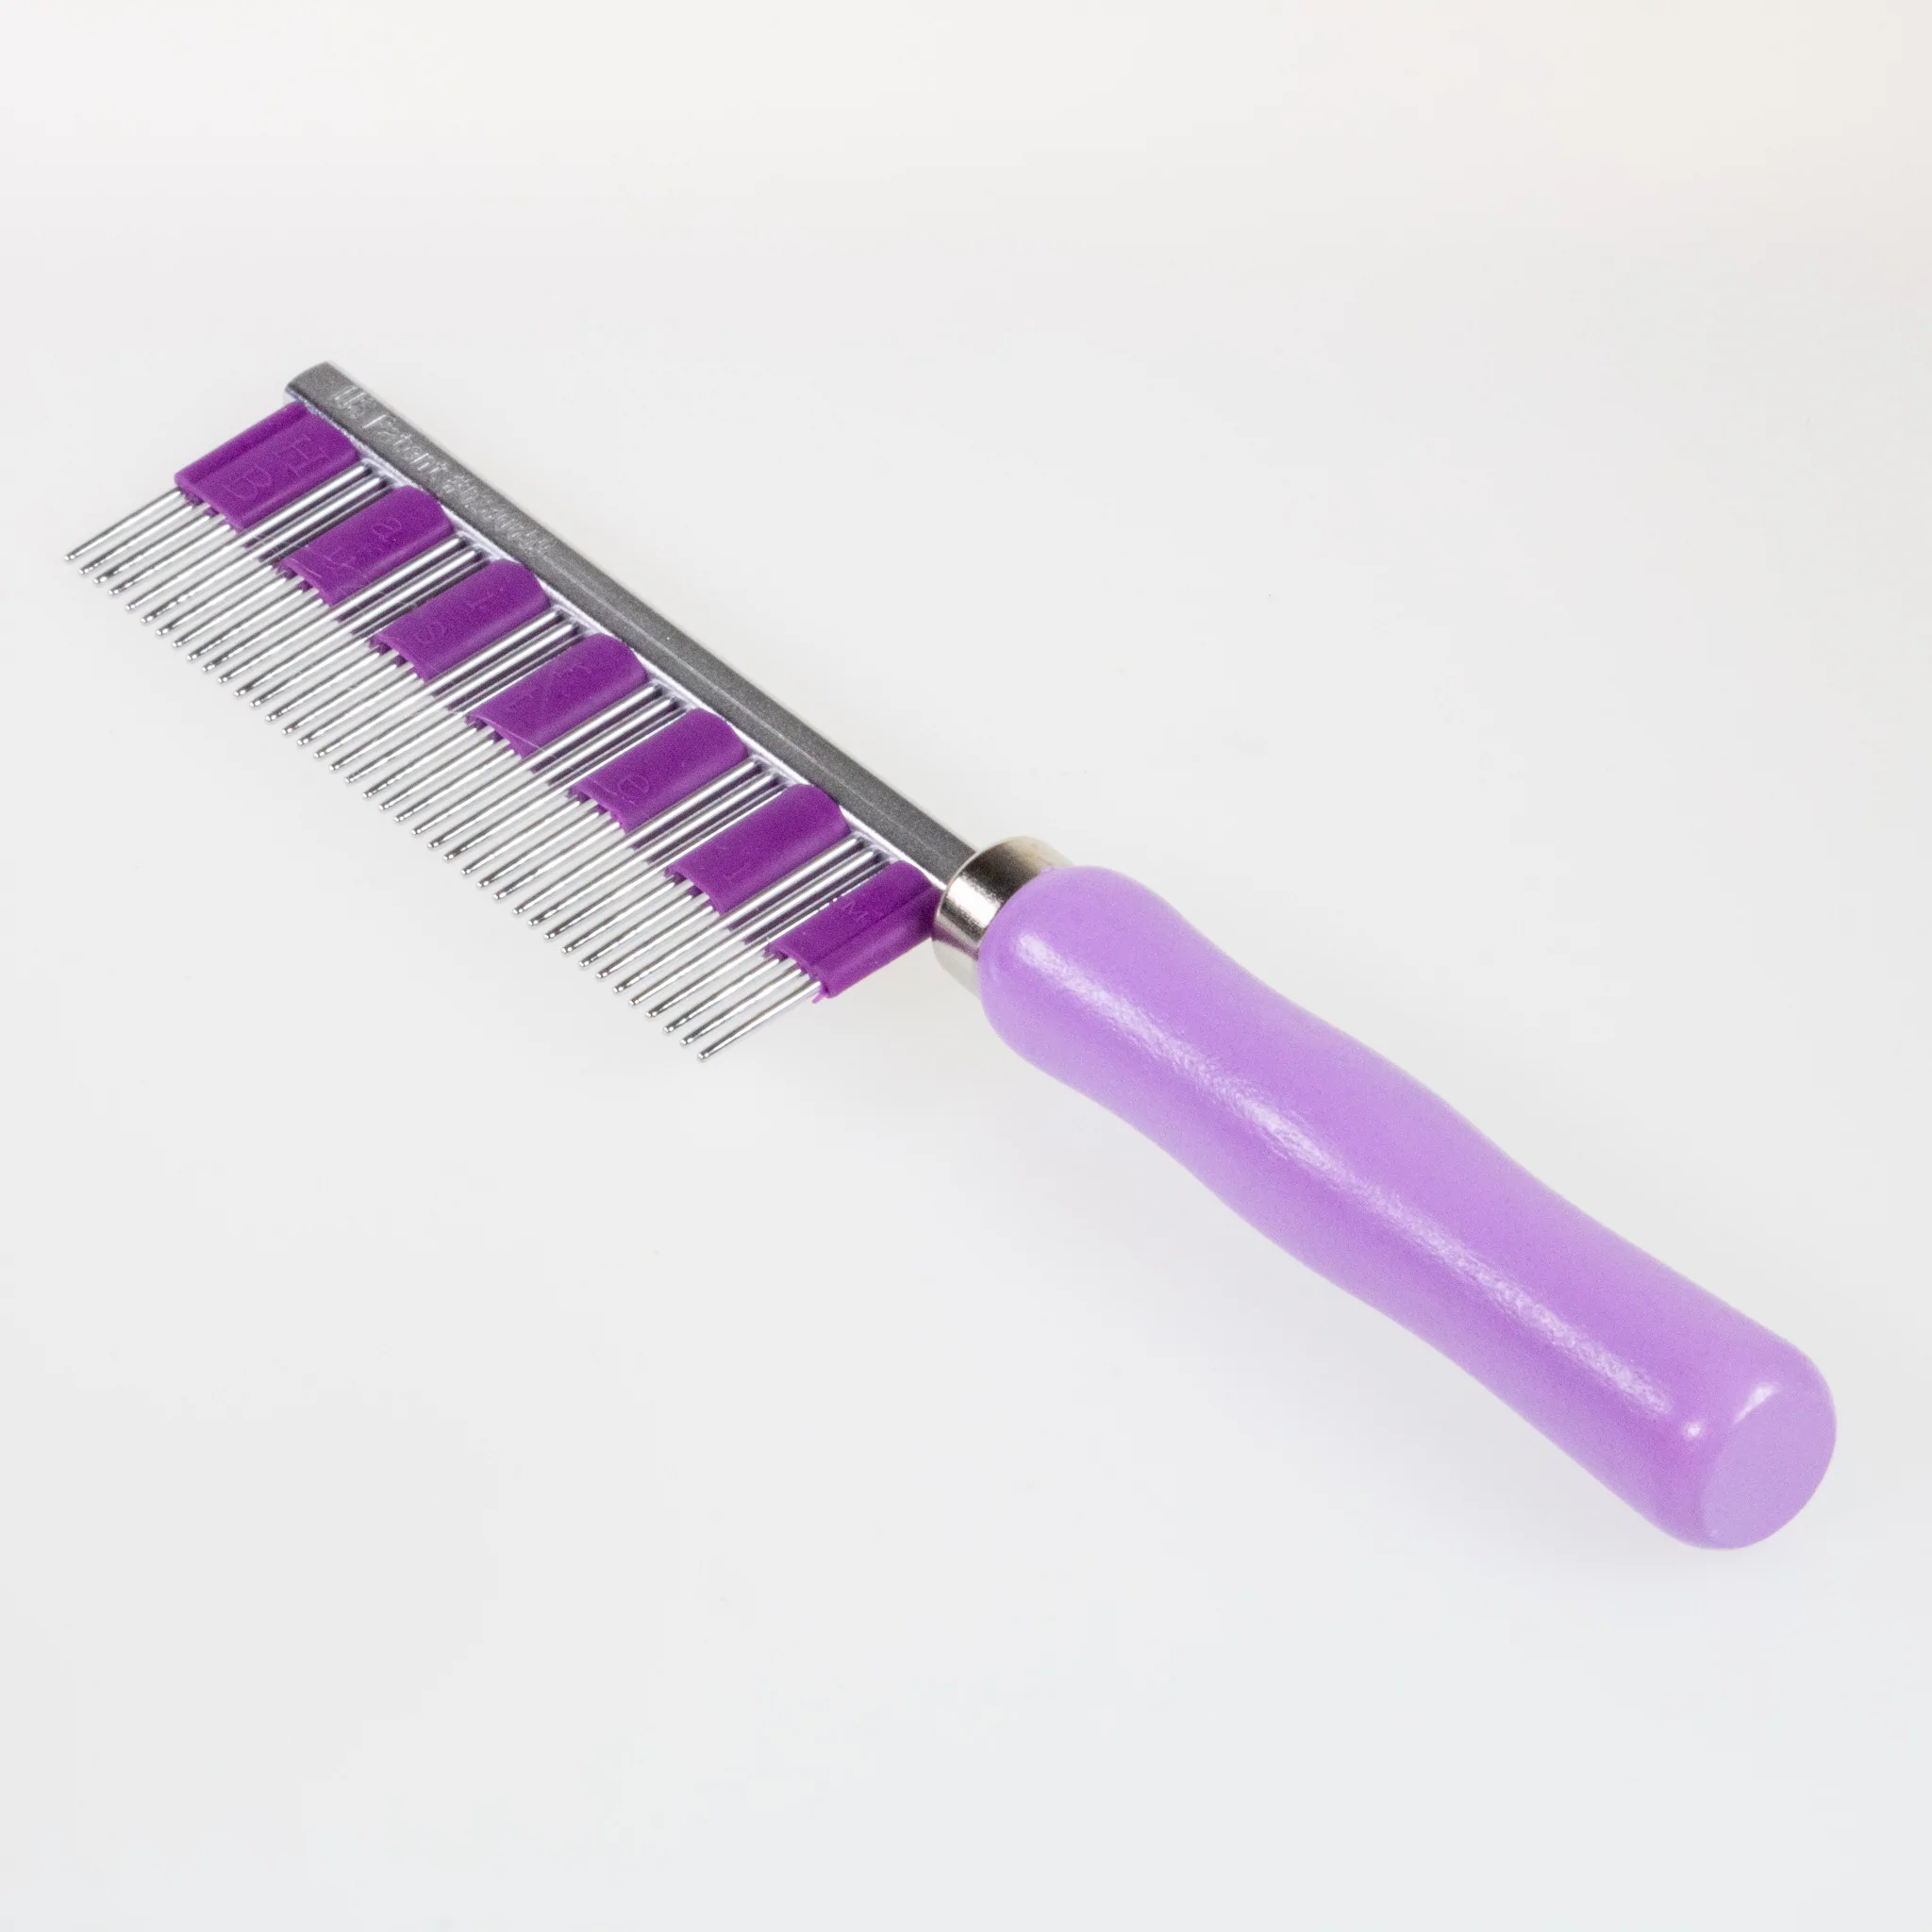 HairBuster Comb - DeShedding Tool for Small Pets